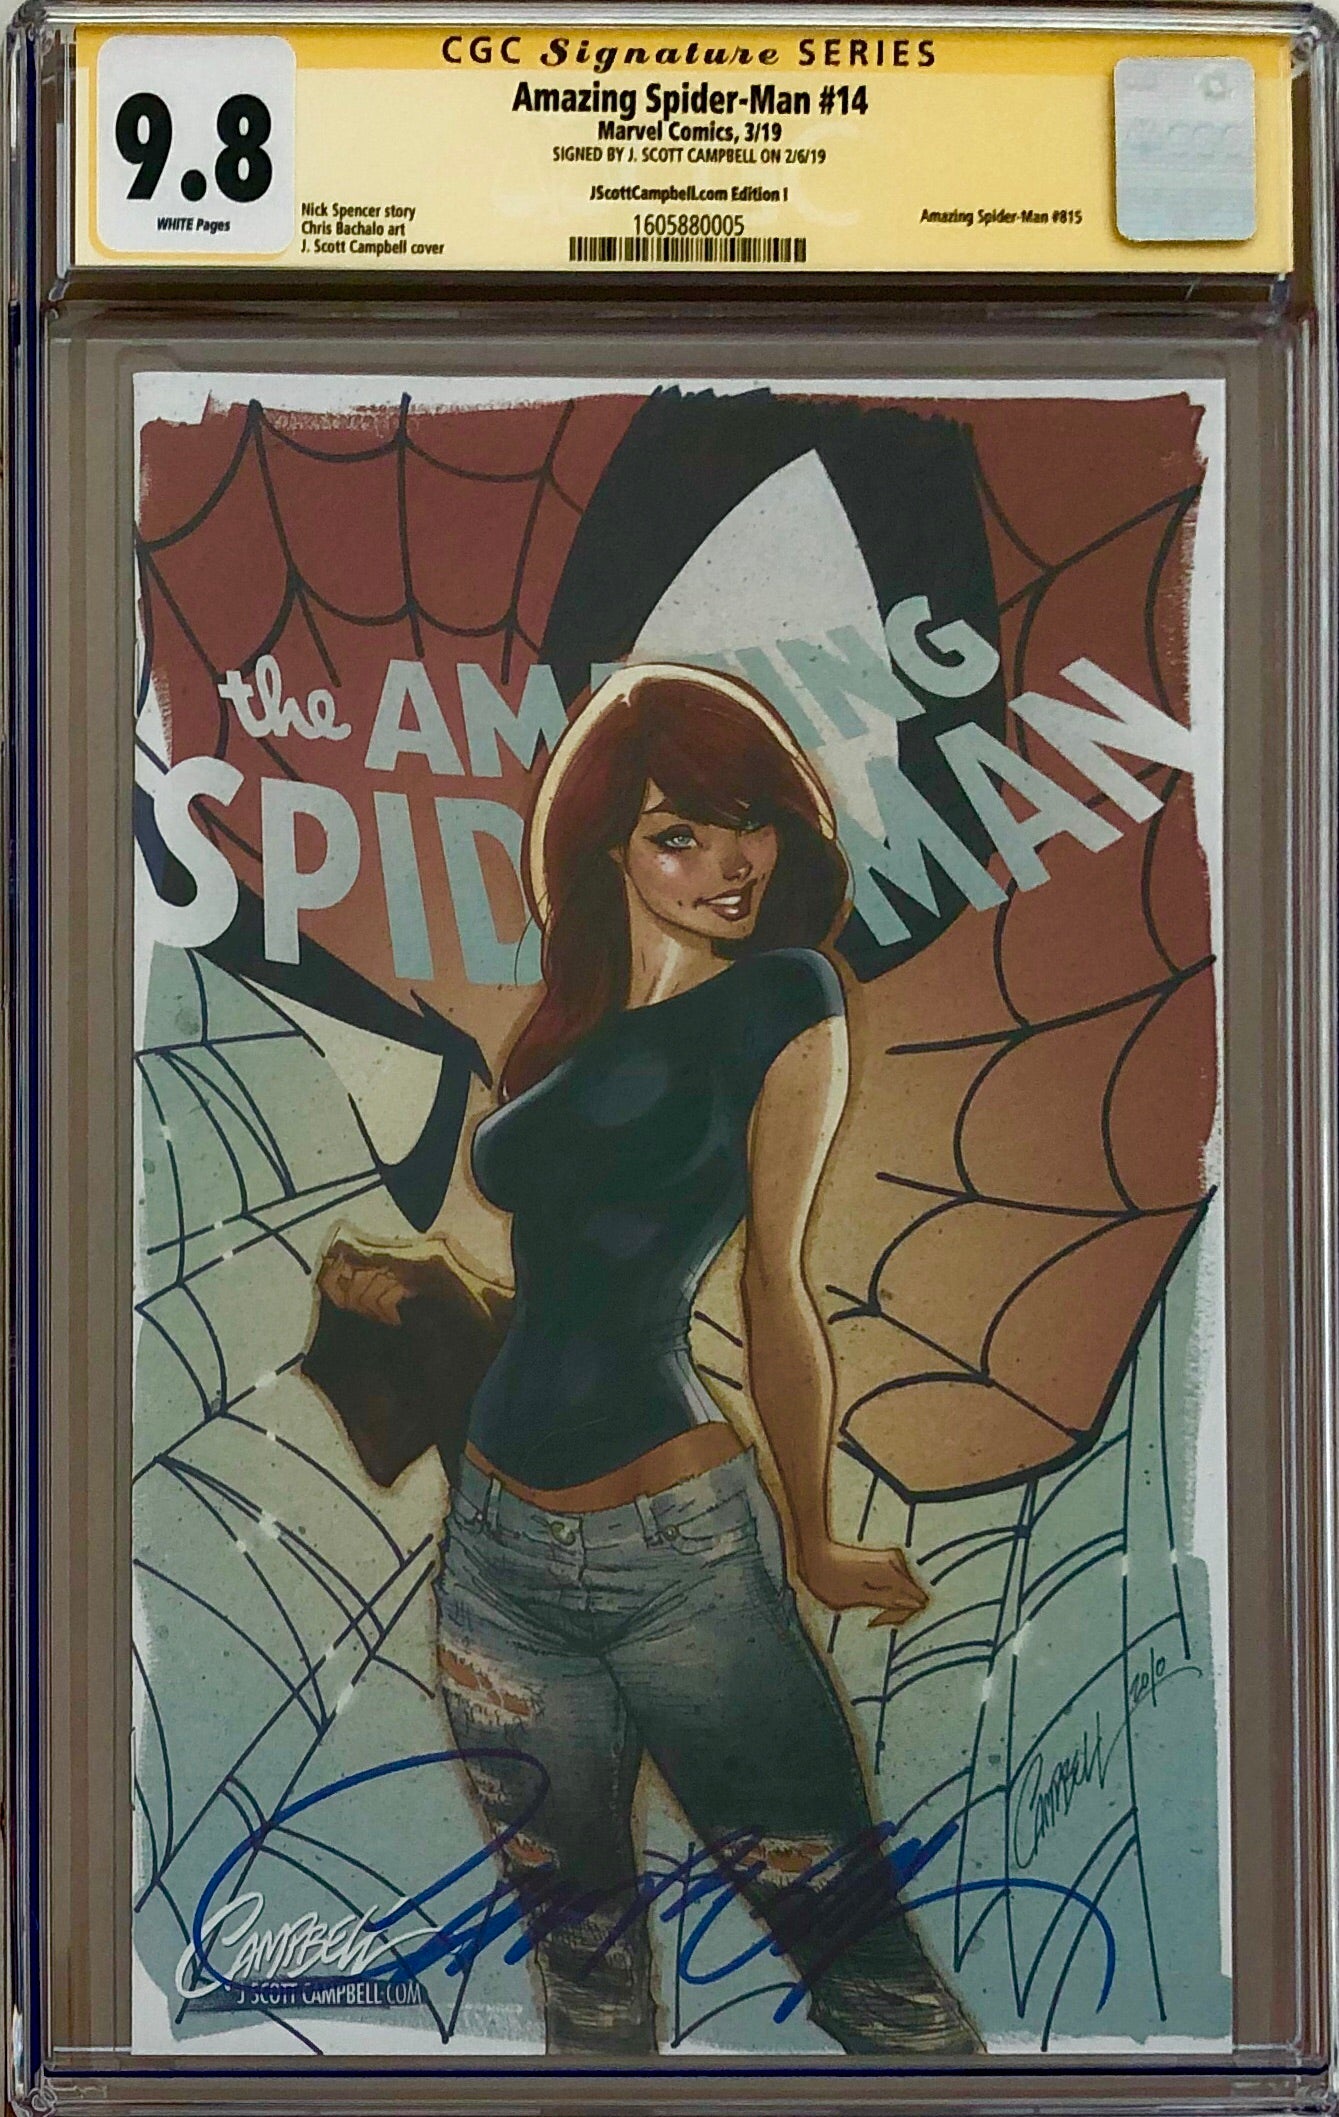 Amazing Spider-Man #14 J. Scott Campbell Edition I "Face it Tiger" MJ SDCC Exclusive CGC 9.8 SS